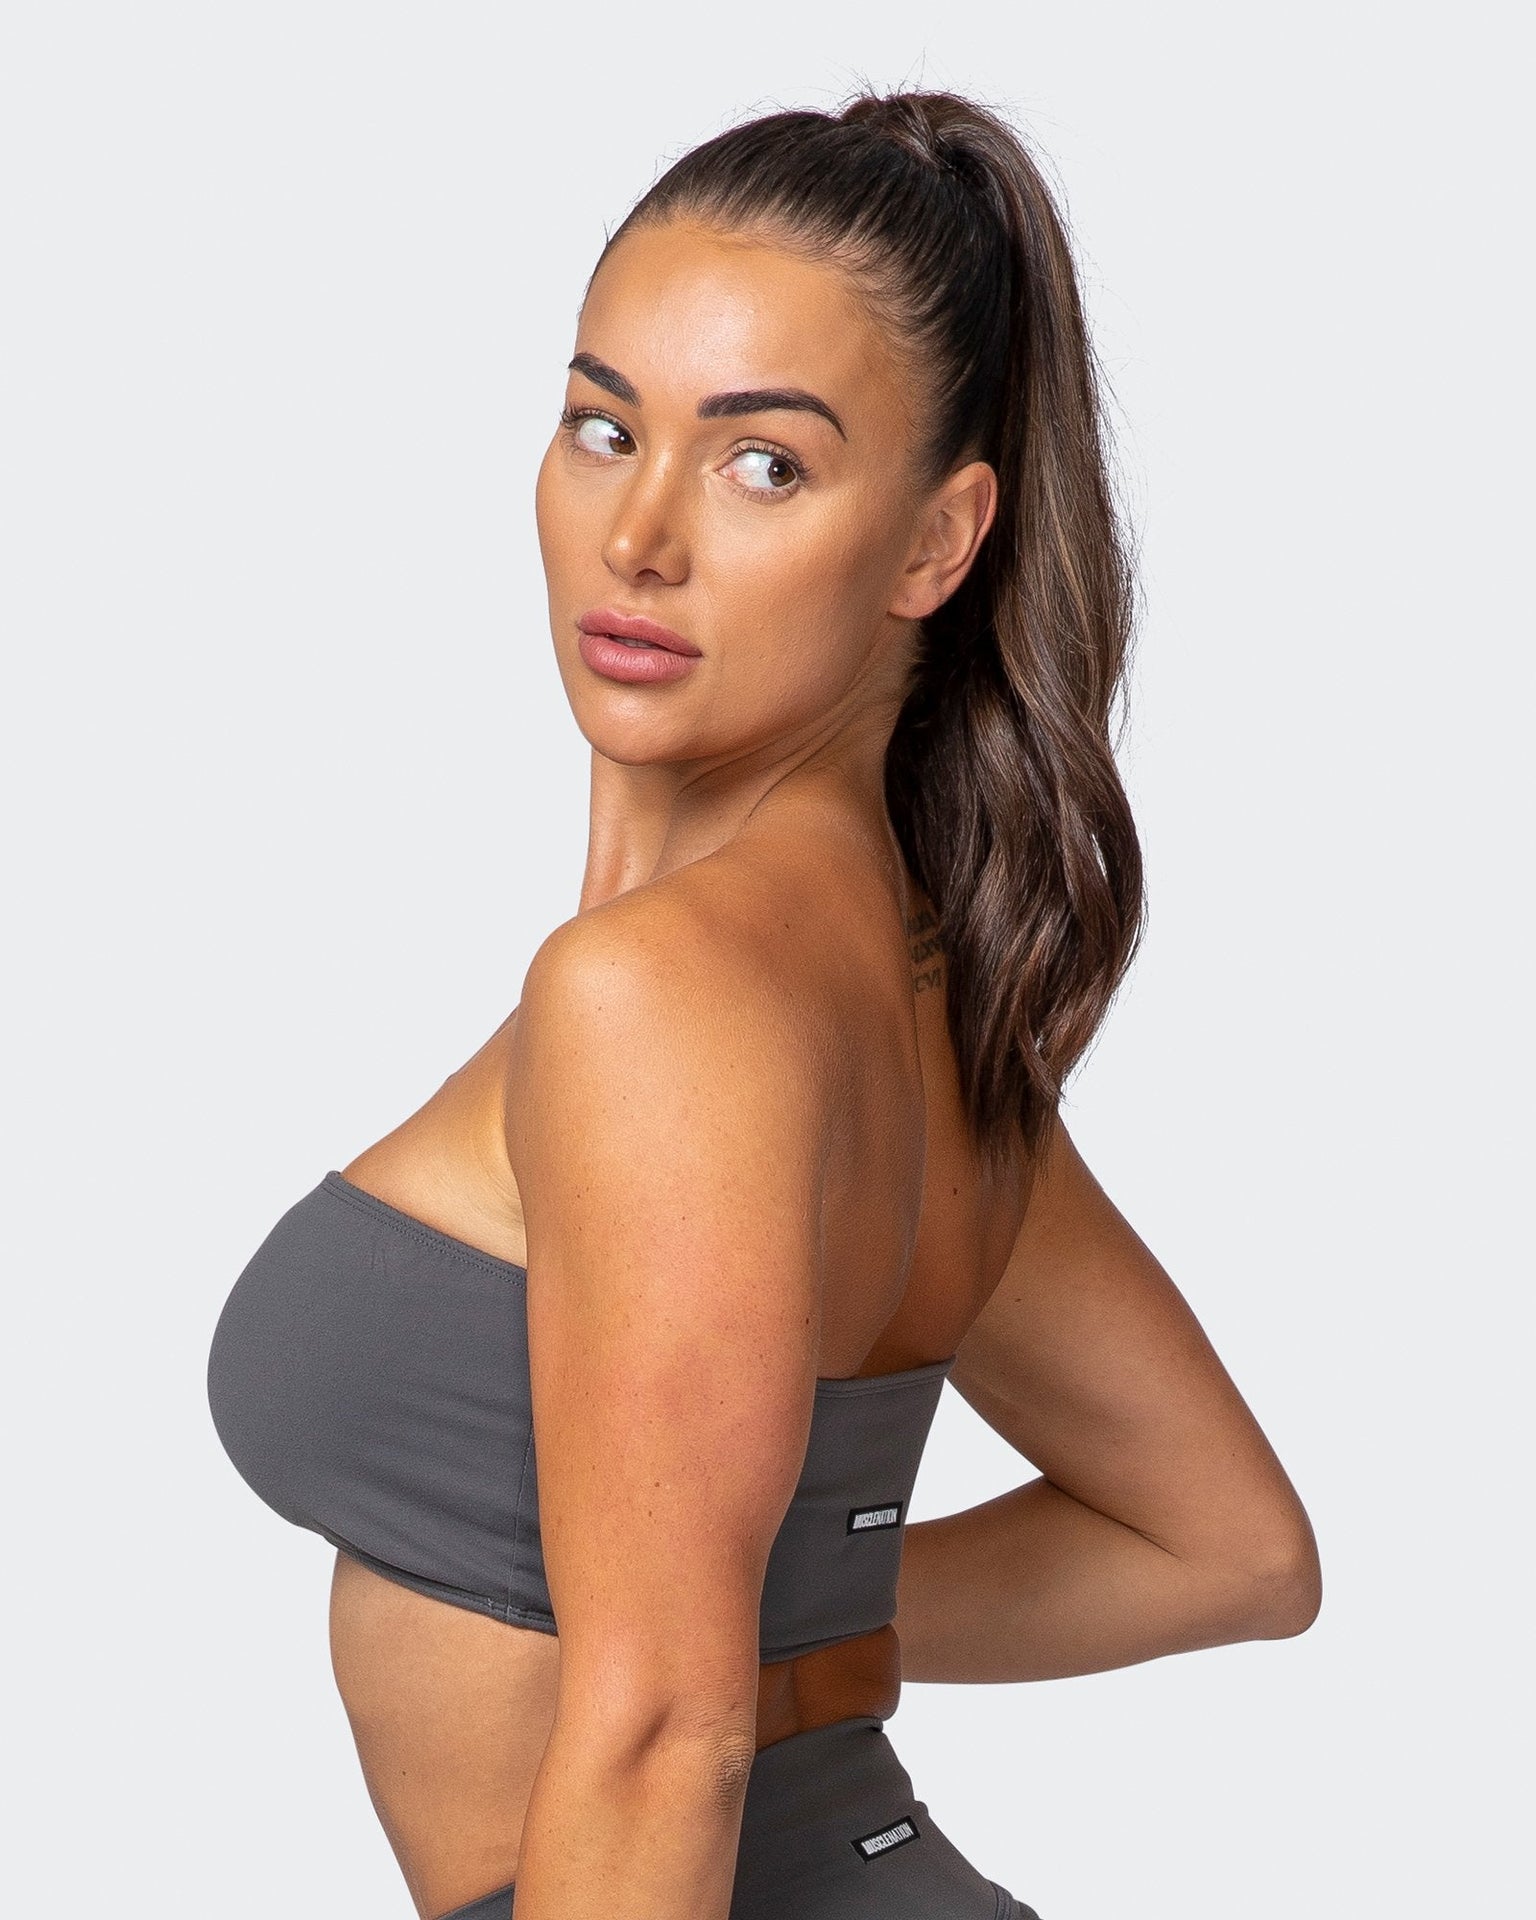 HIIT seamless rib bralet in charcoal